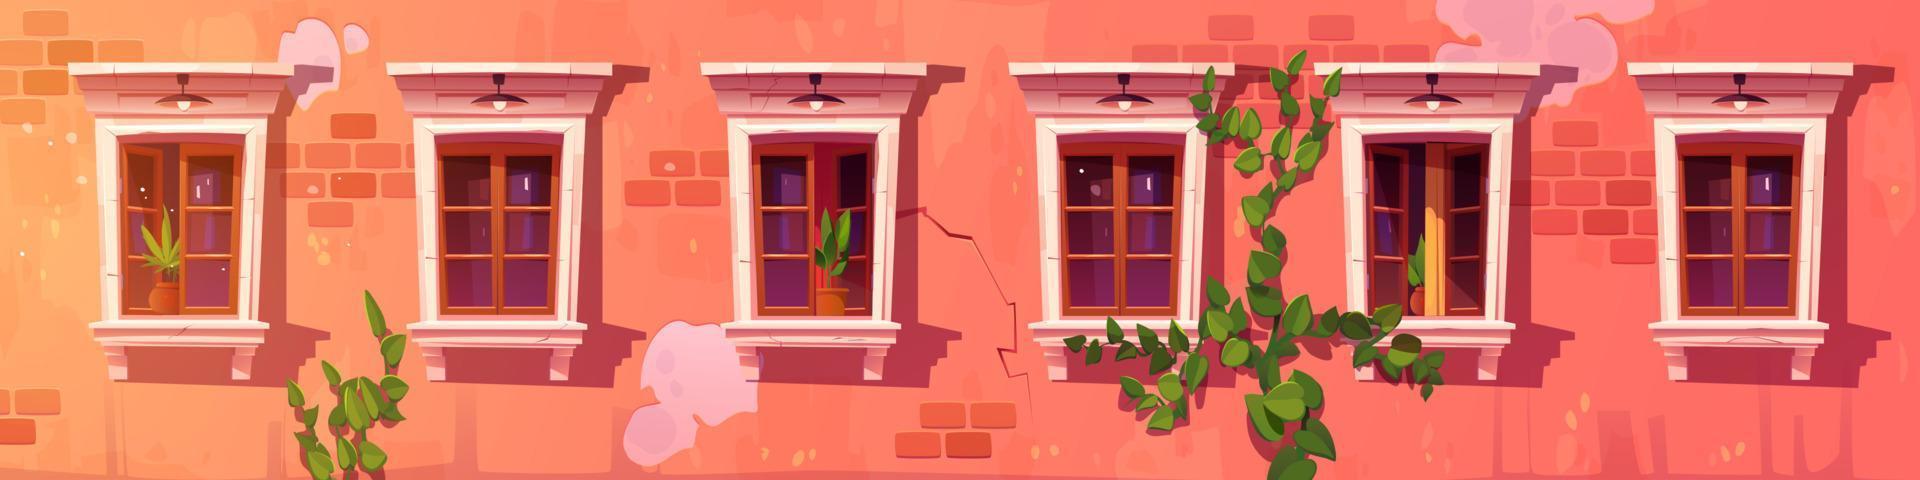 Old apartment house with classic windows vector